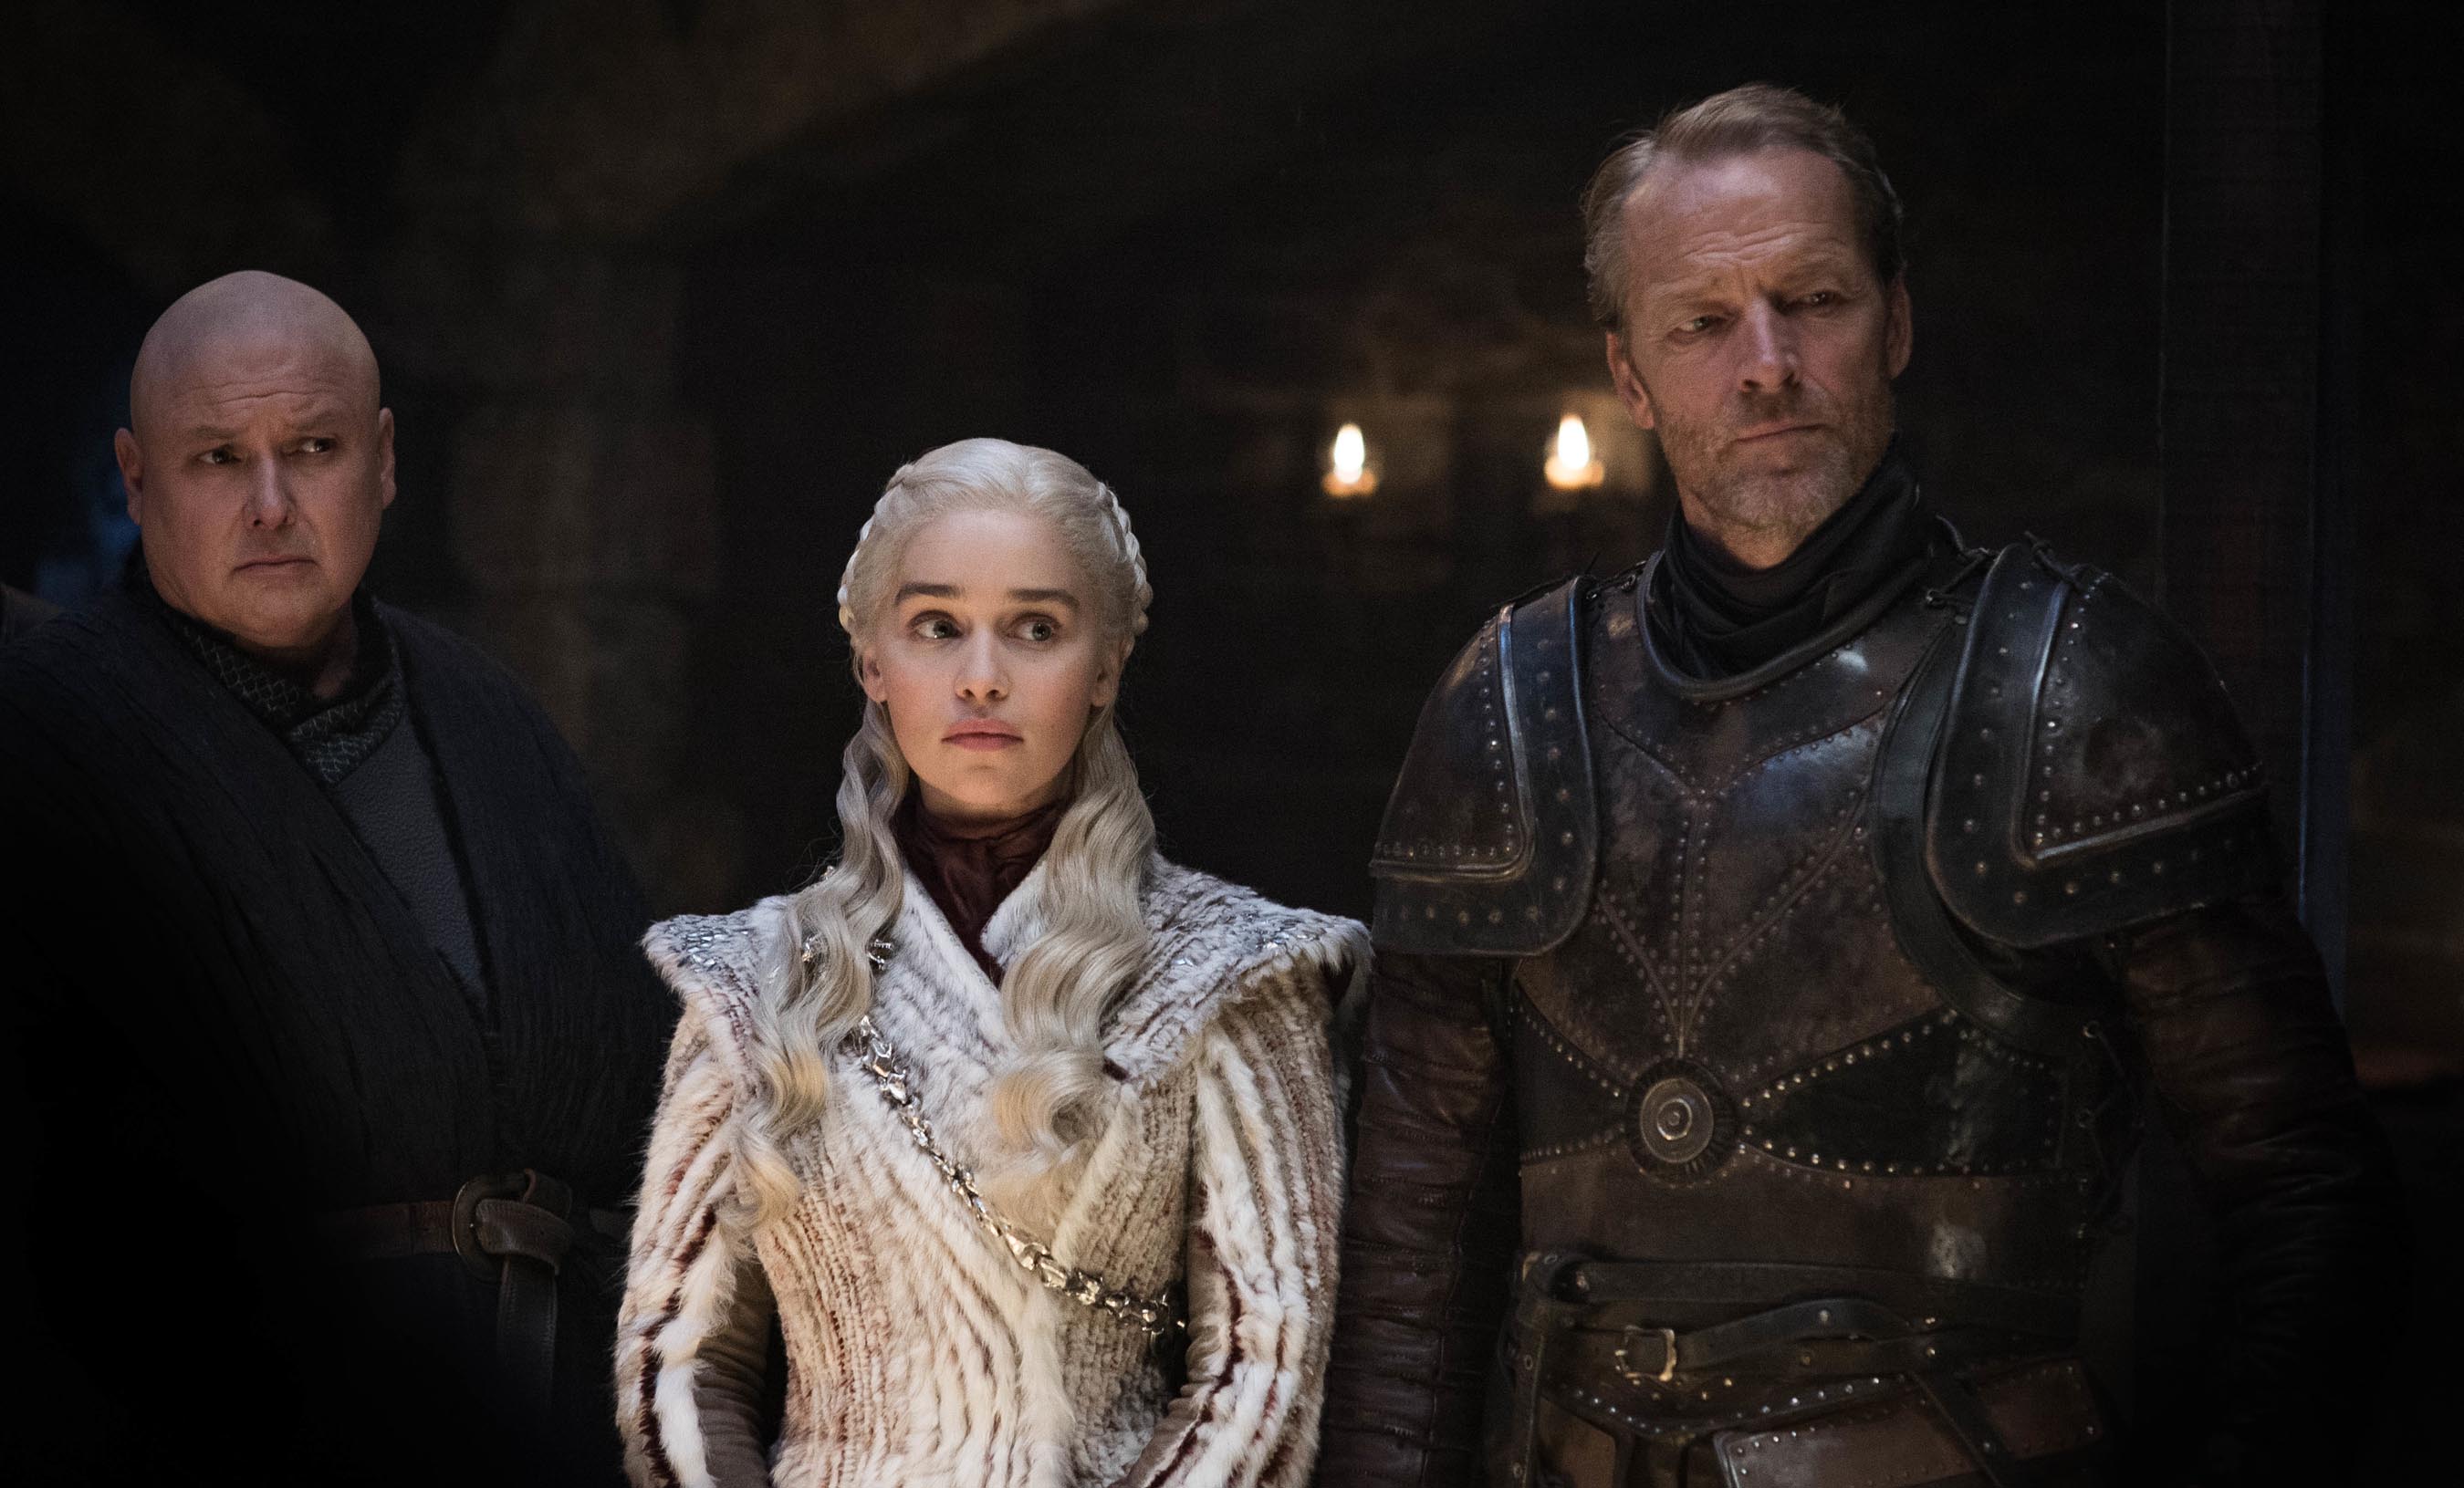 Game of Thrones: HBO releases 14 new photos from Season 8, Episode 2